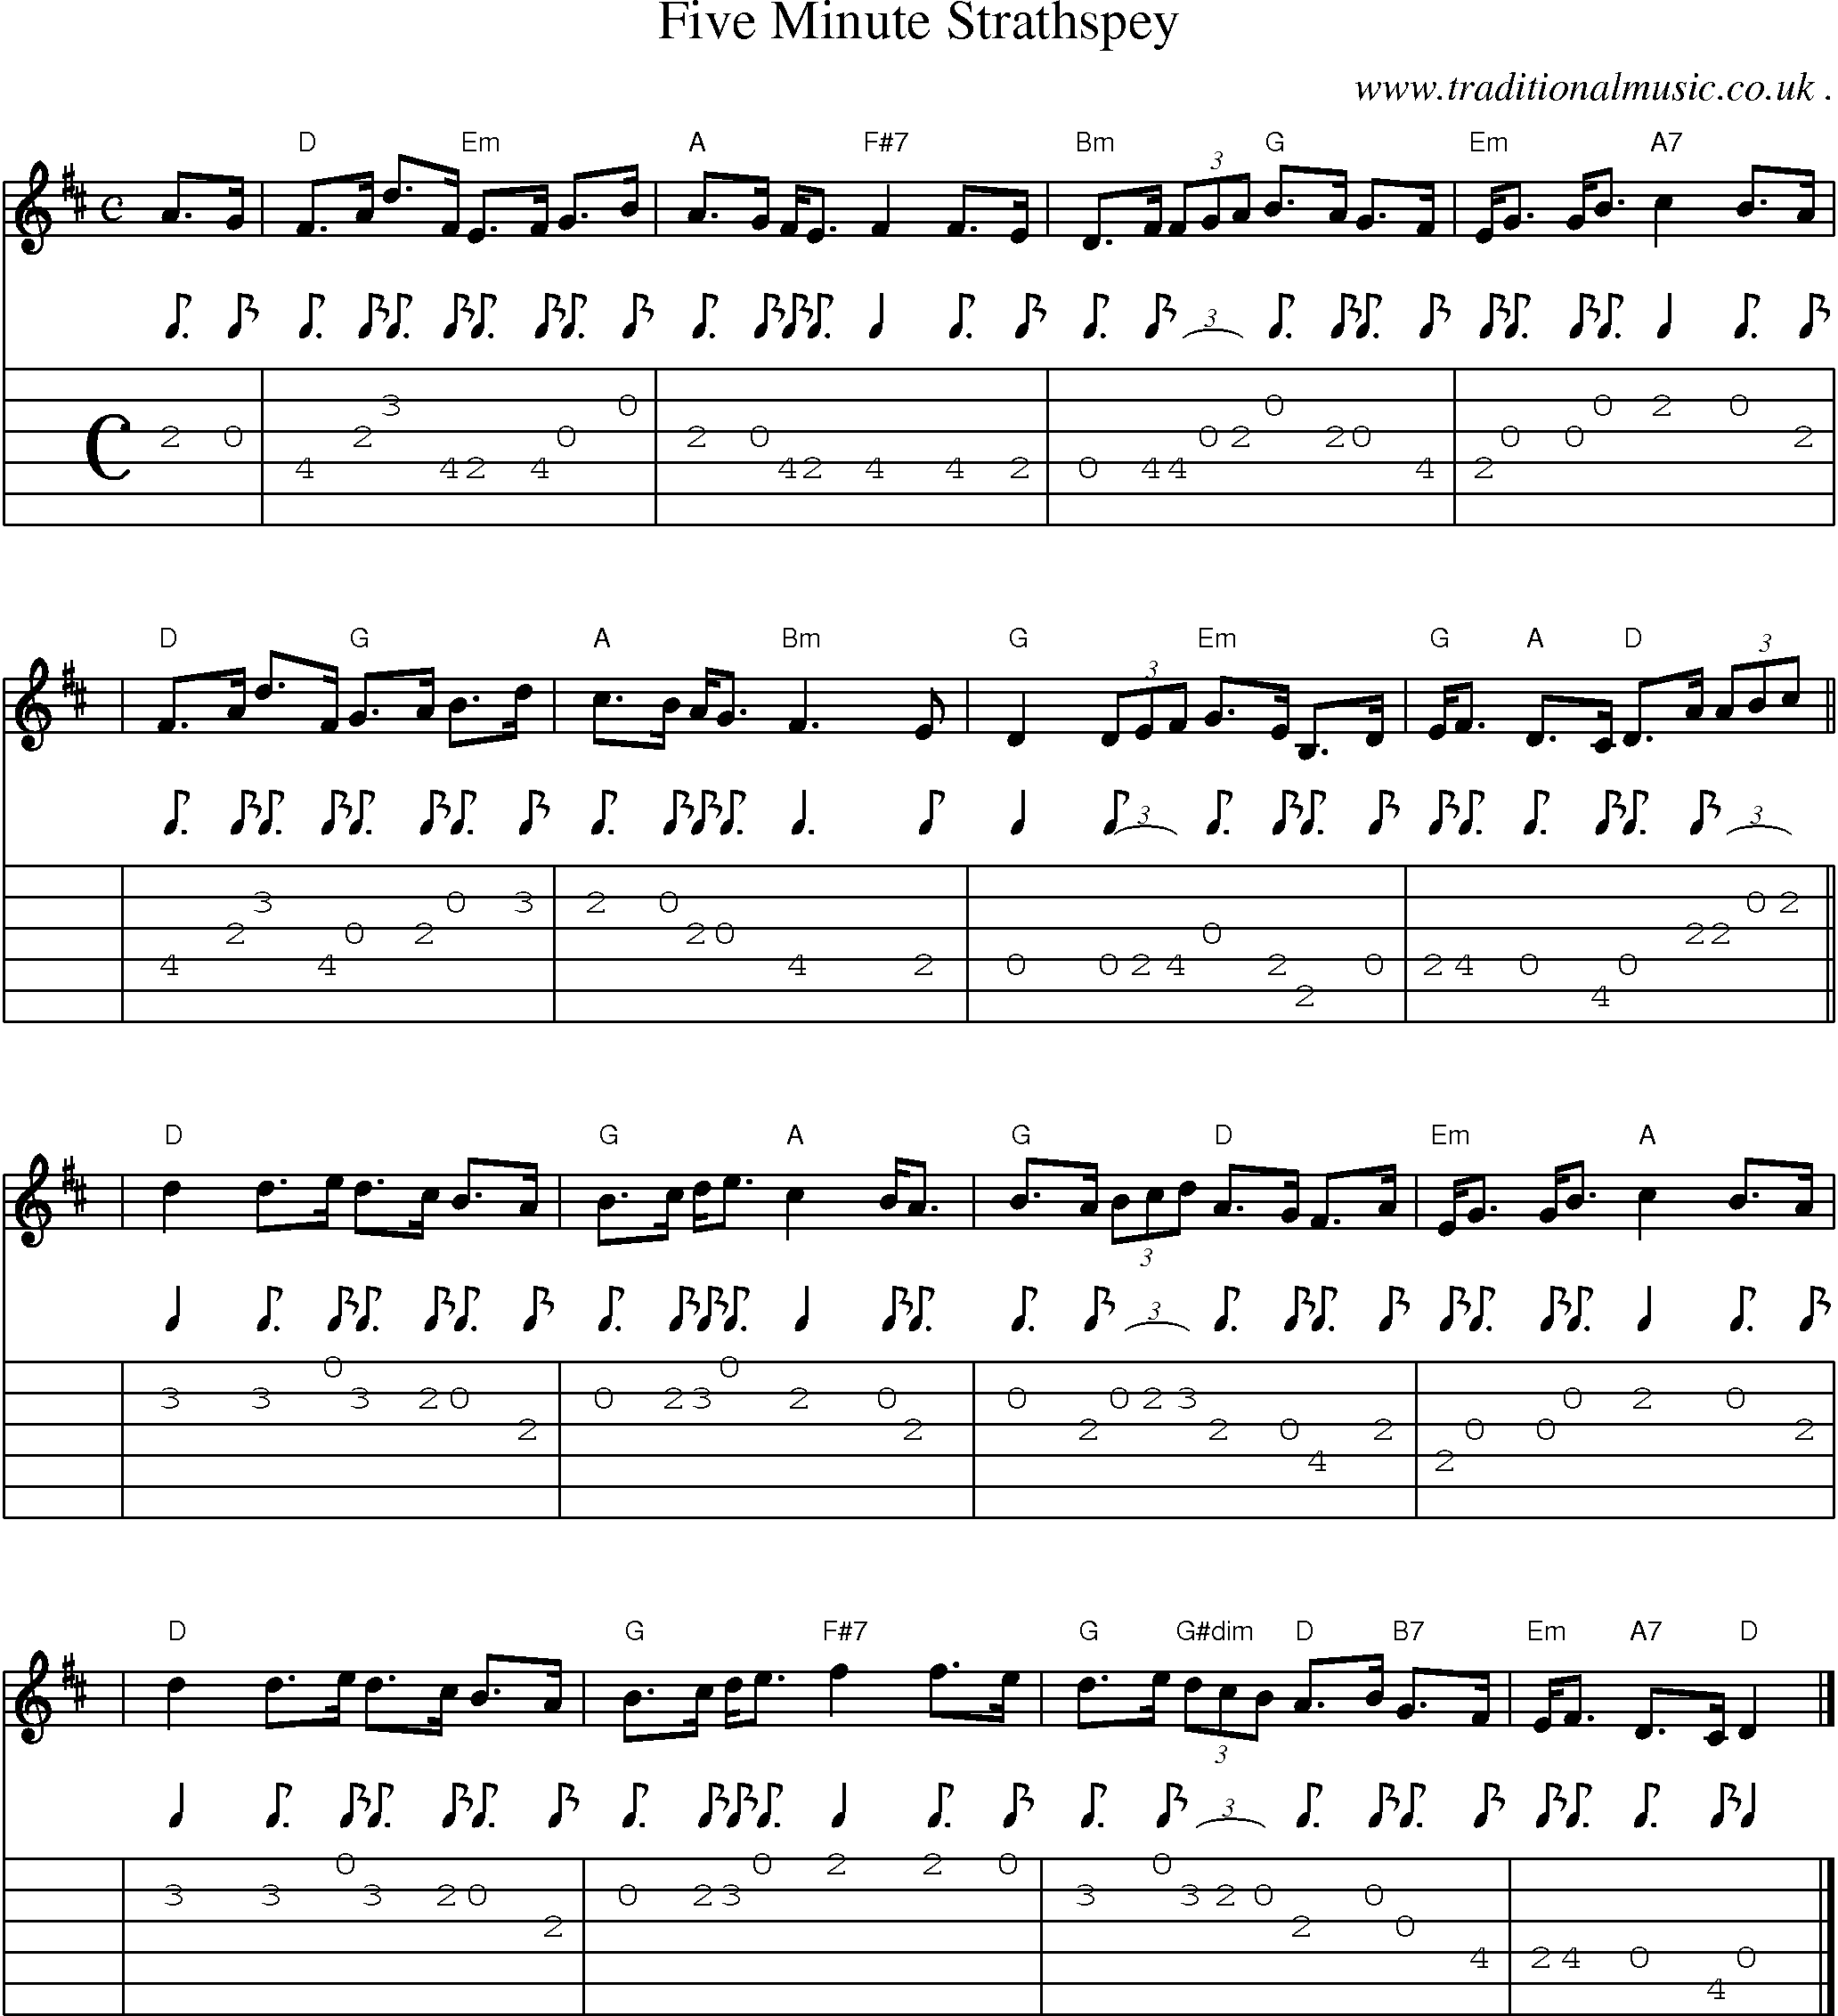 Sheet-music  score, Chords and Guitar Tabs for Five Minute Strathspey